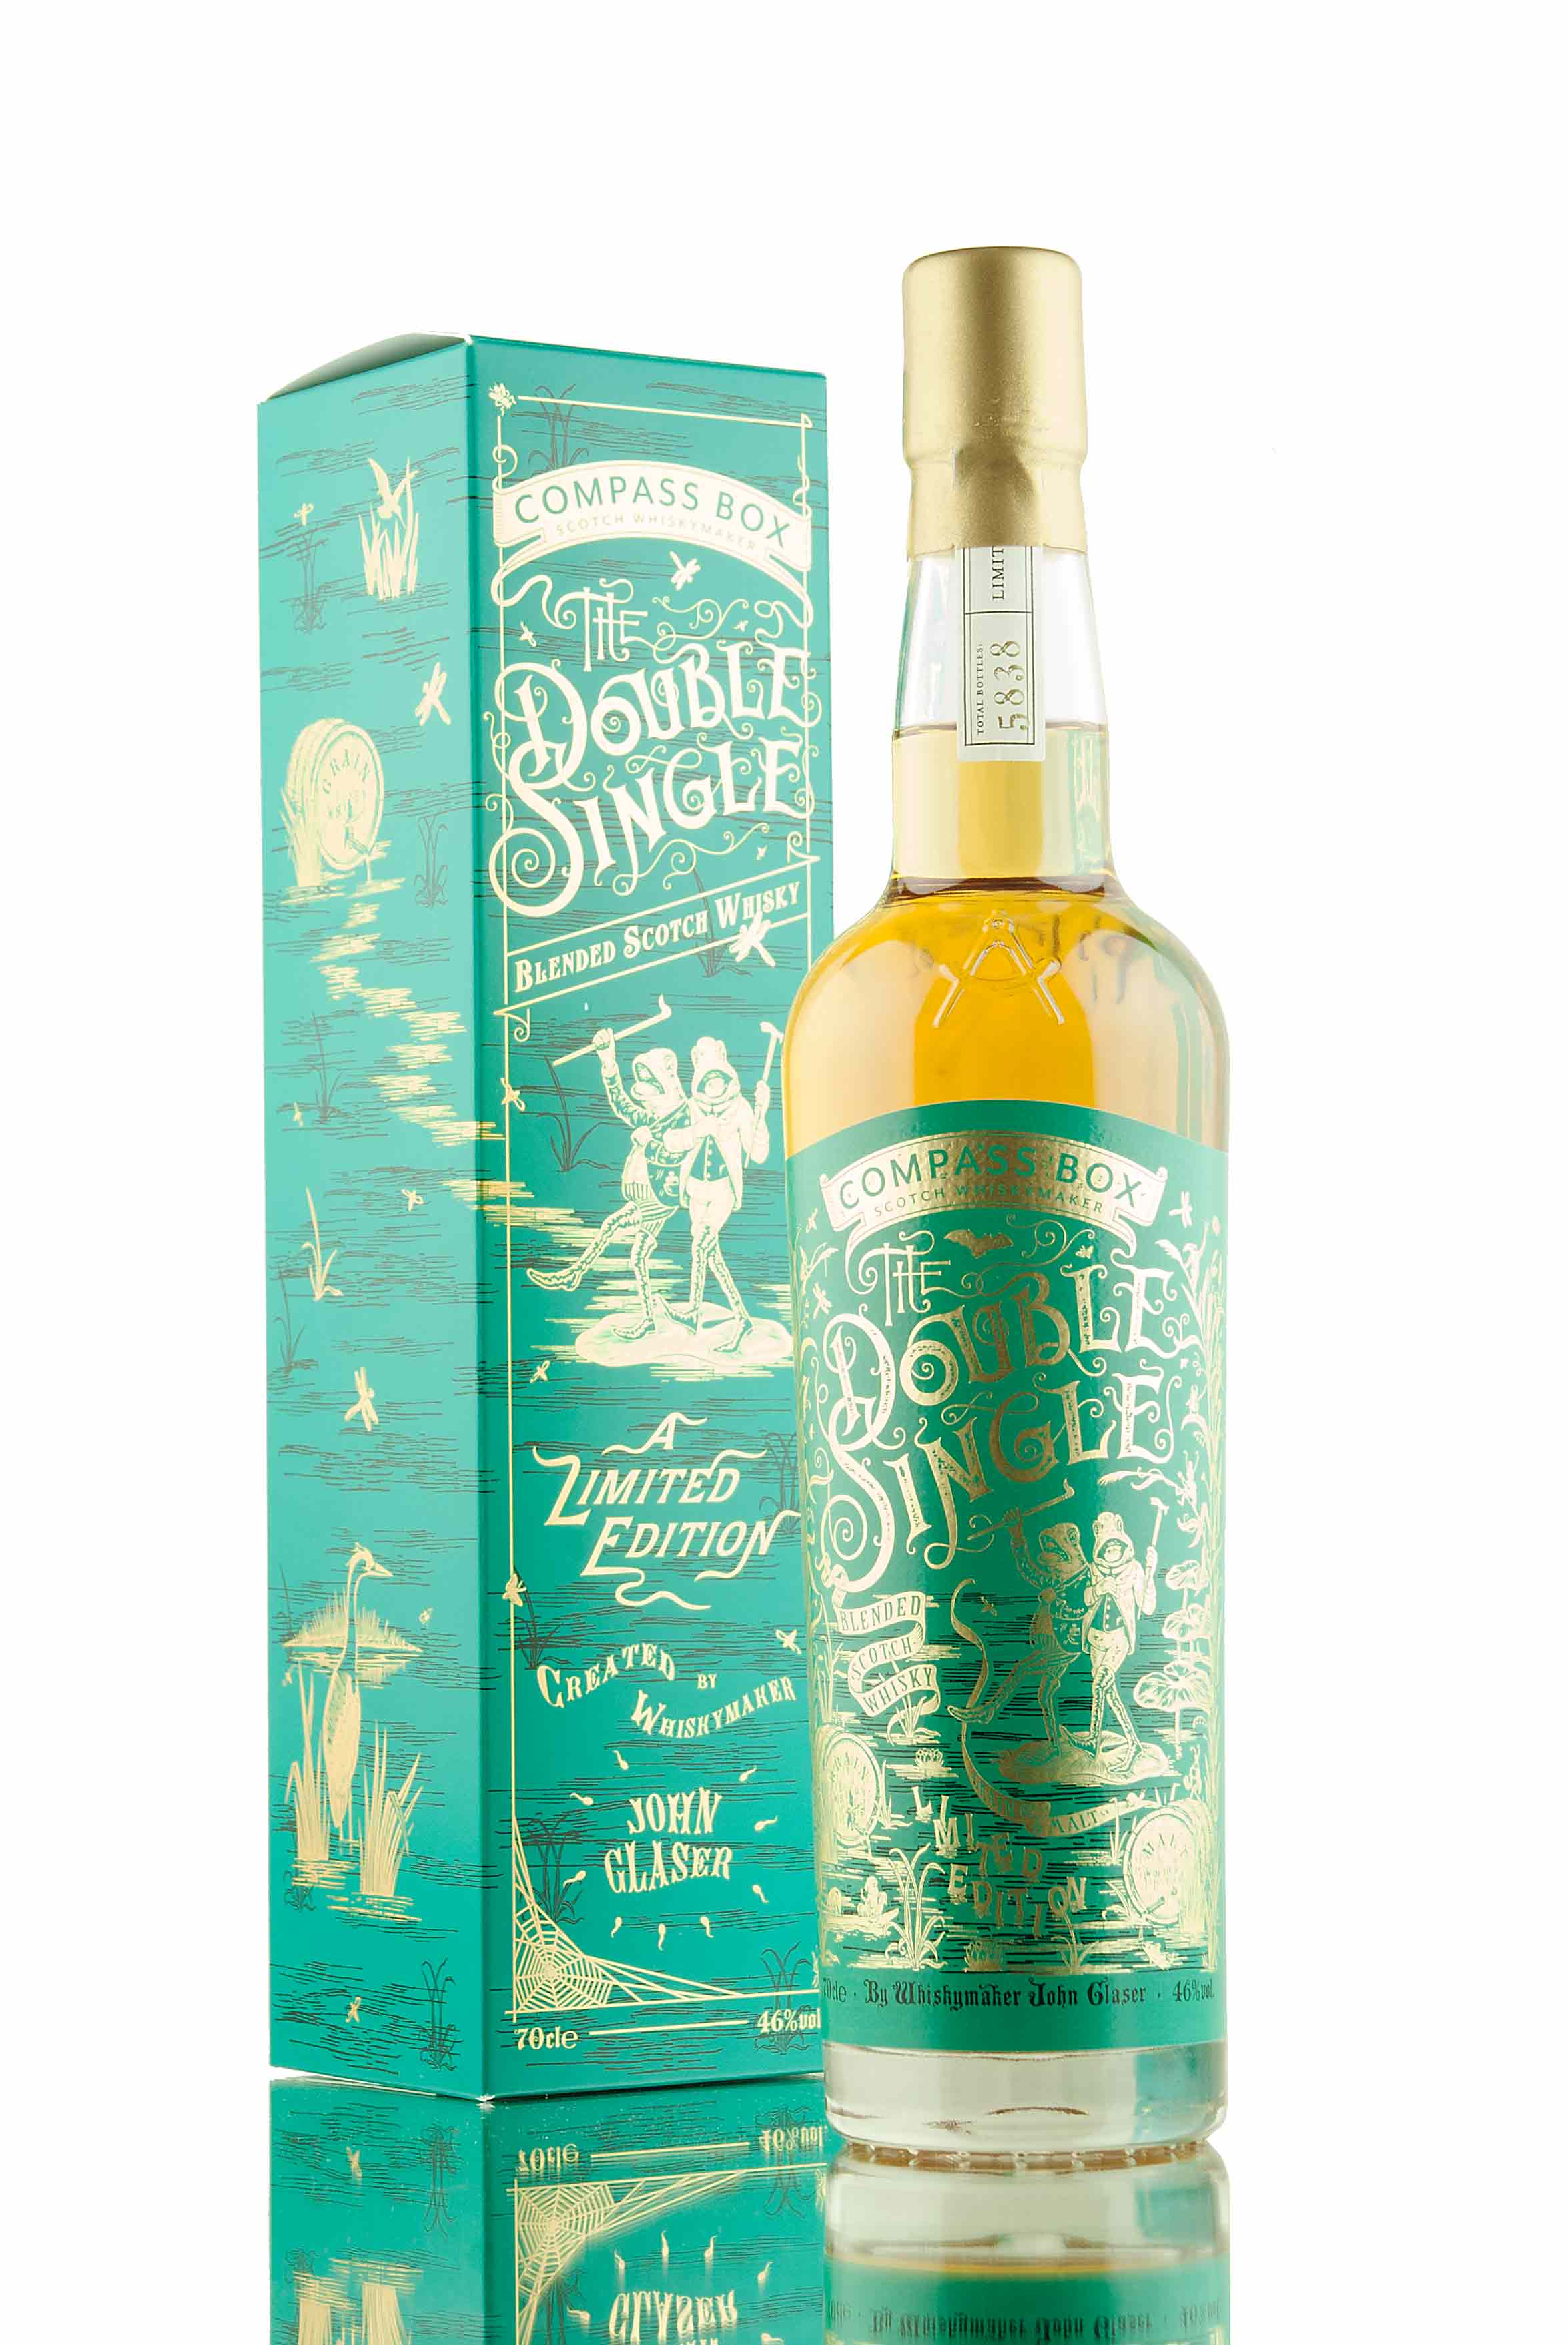 Compass Box Double Single | Spring Limited Edition 2017